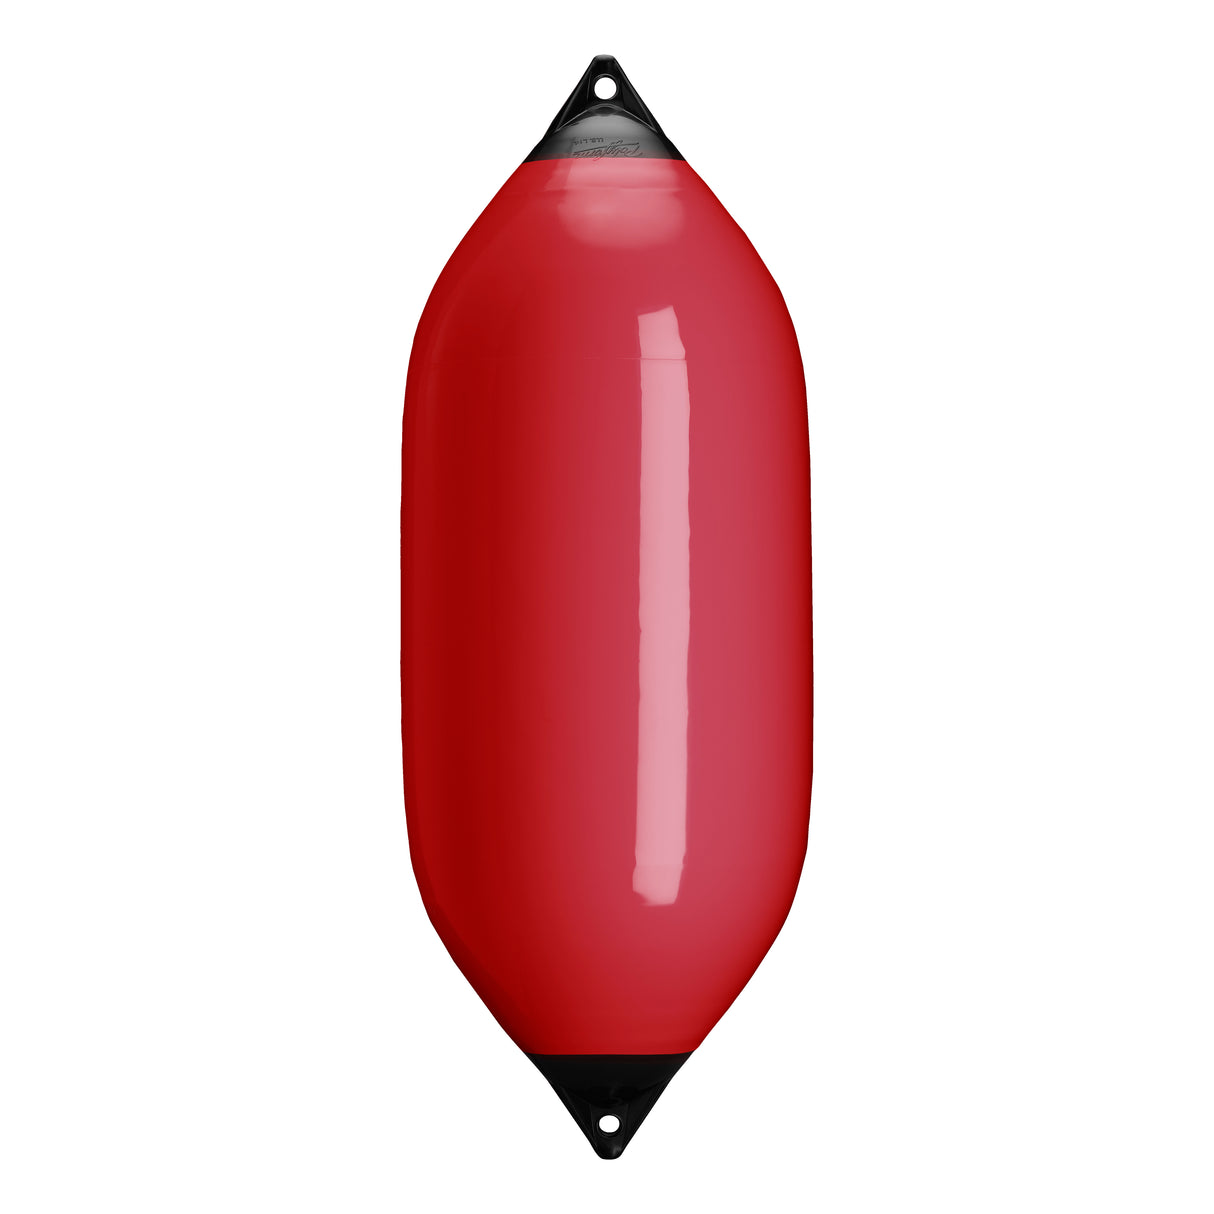 Classic Red boat fender with Navy-Top, Polyform F-11